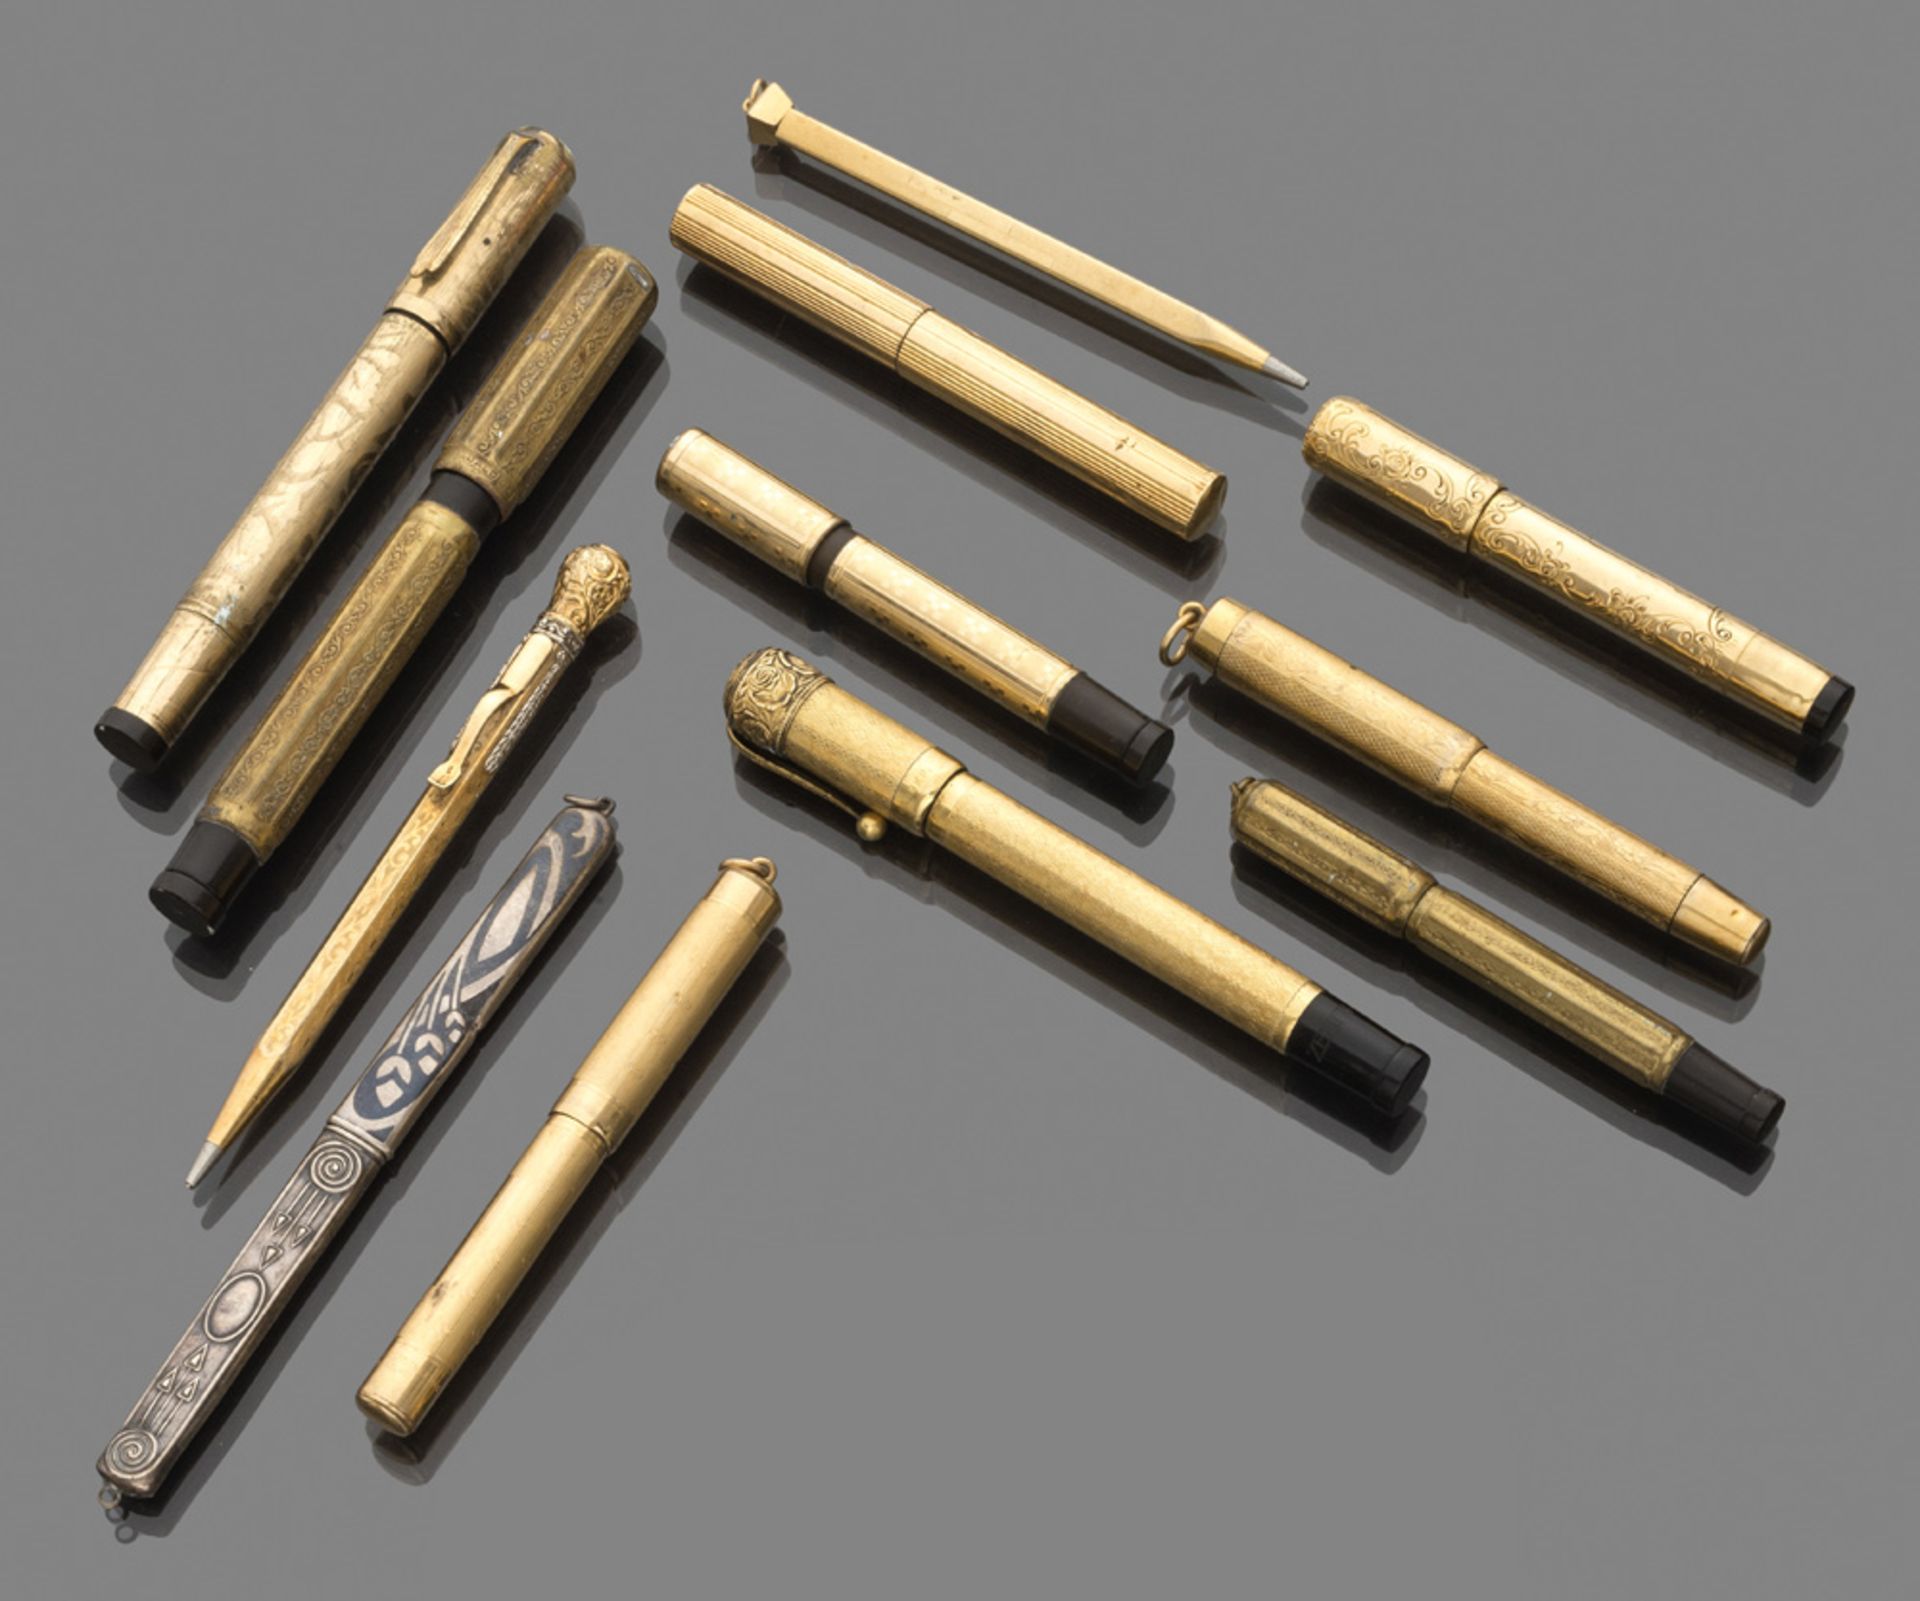 NINE FOUNTAIN PENS AND TWO PENCILS, EARLY 20TH CENTURY laminated in yellow gold, one of the